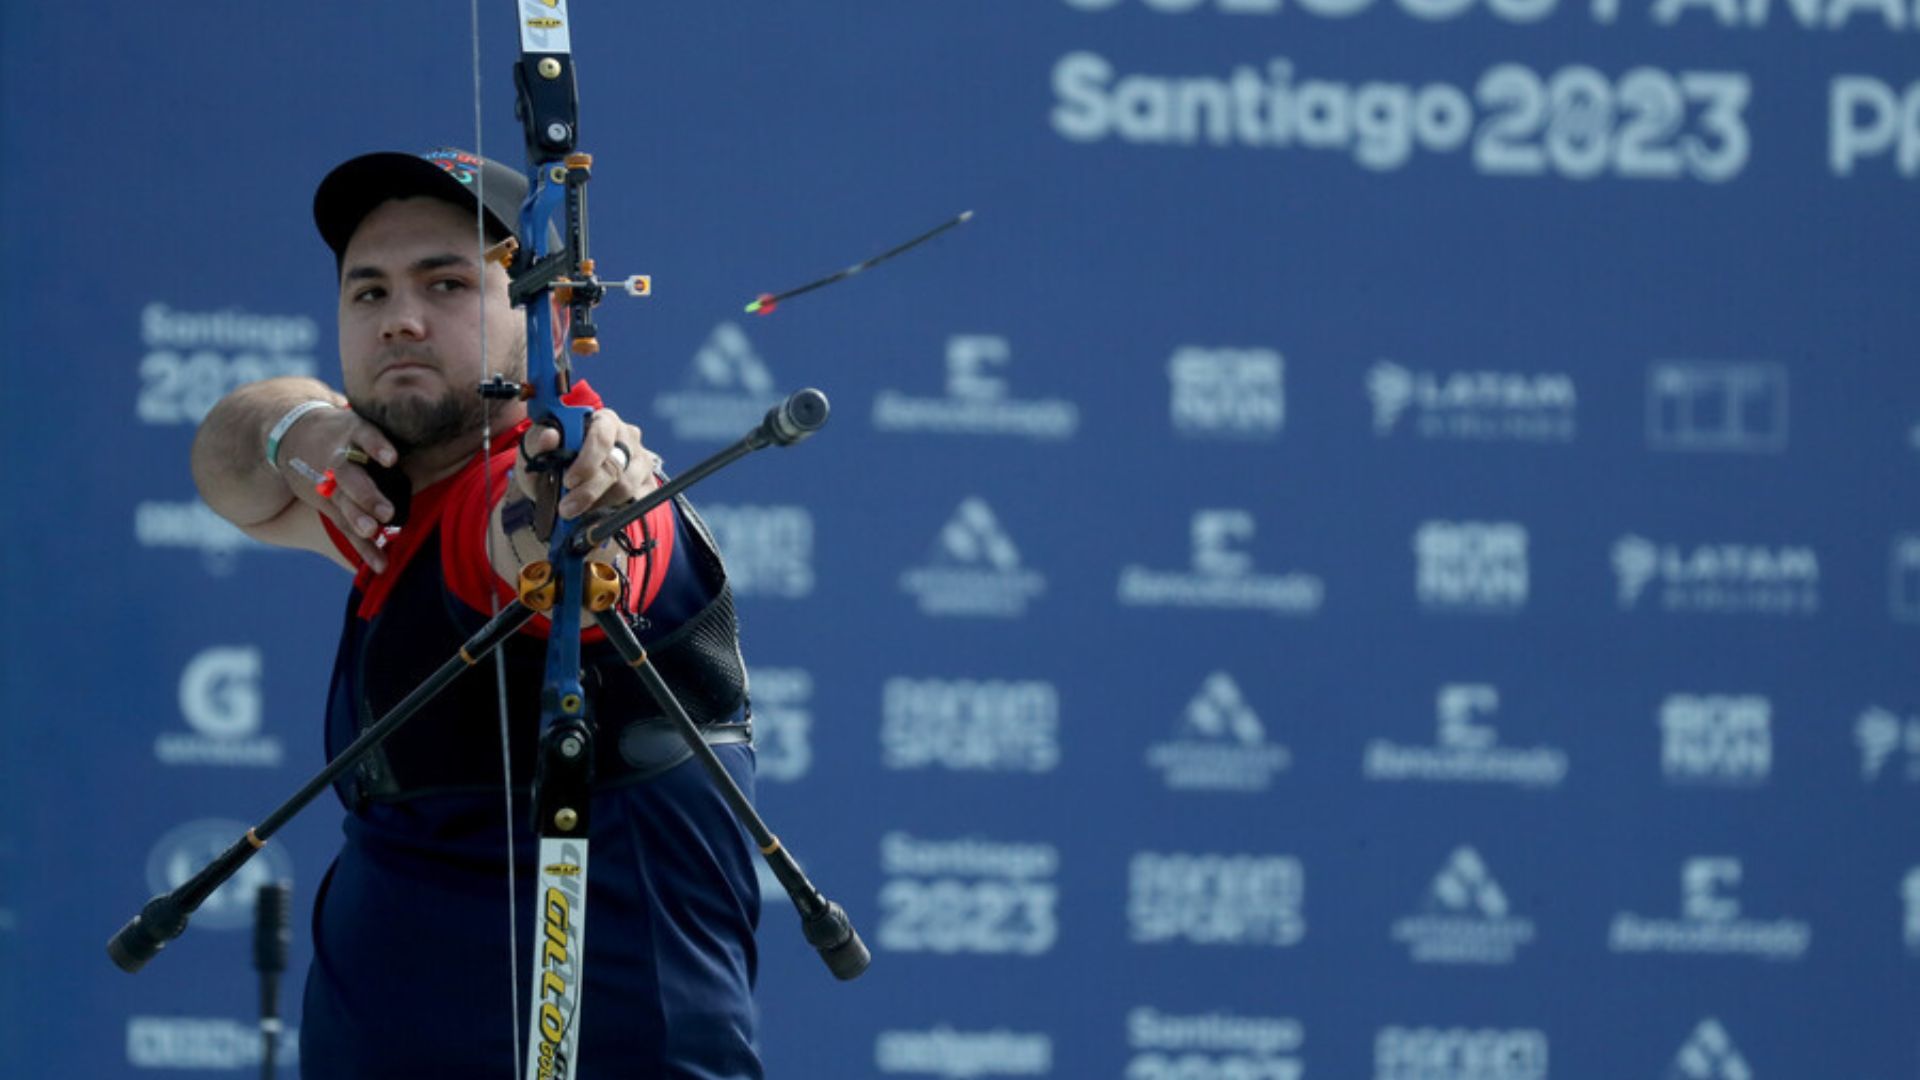 Archery: Chile Secured Bronze in Individual Recurve Archery